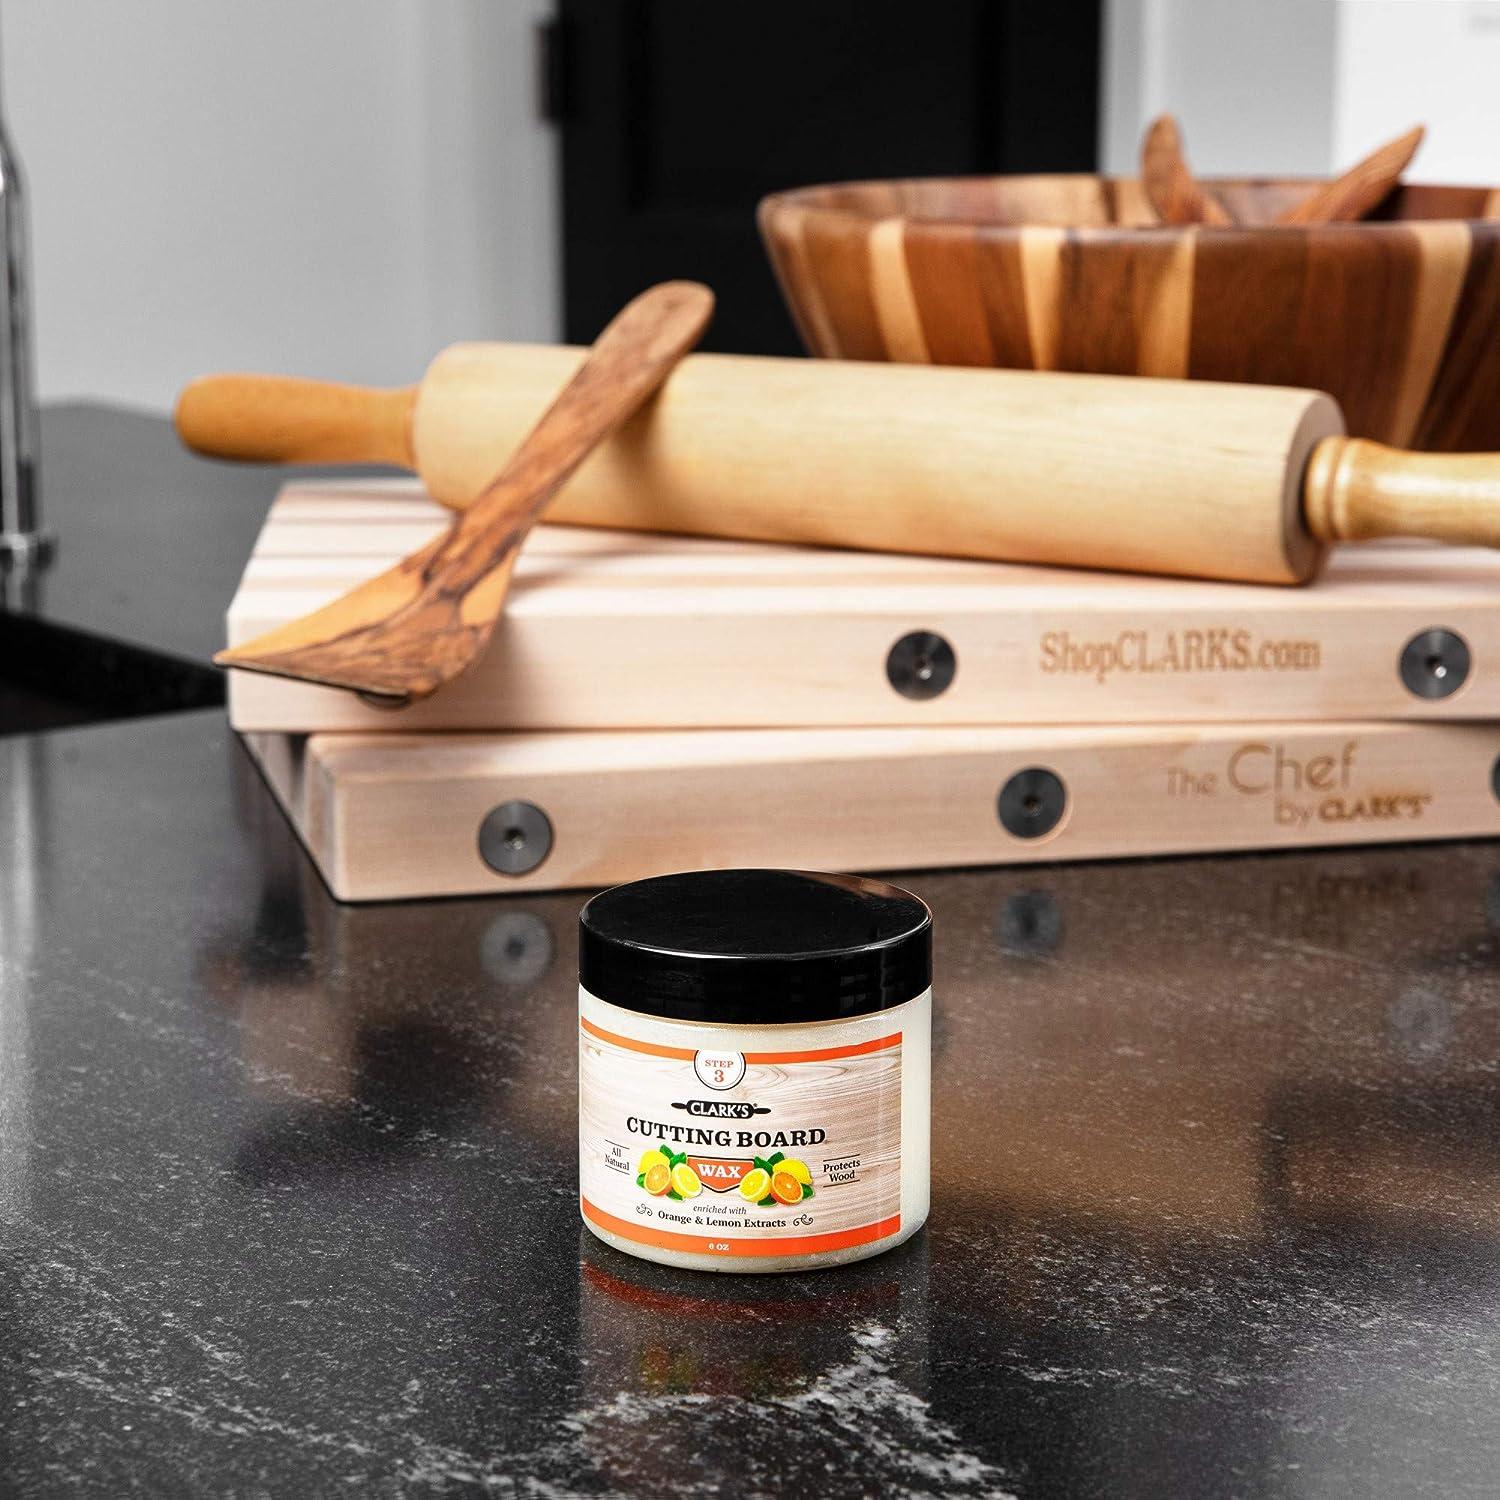 CLARKs Cutting Board Oil and Wax Kit Includes Food Grade Mineral Oil (12oz), Finishing Wax (6oz), Applicator, & Buffing Pad to Clean Protect Wood, with Natural Lemon & Orange Extract